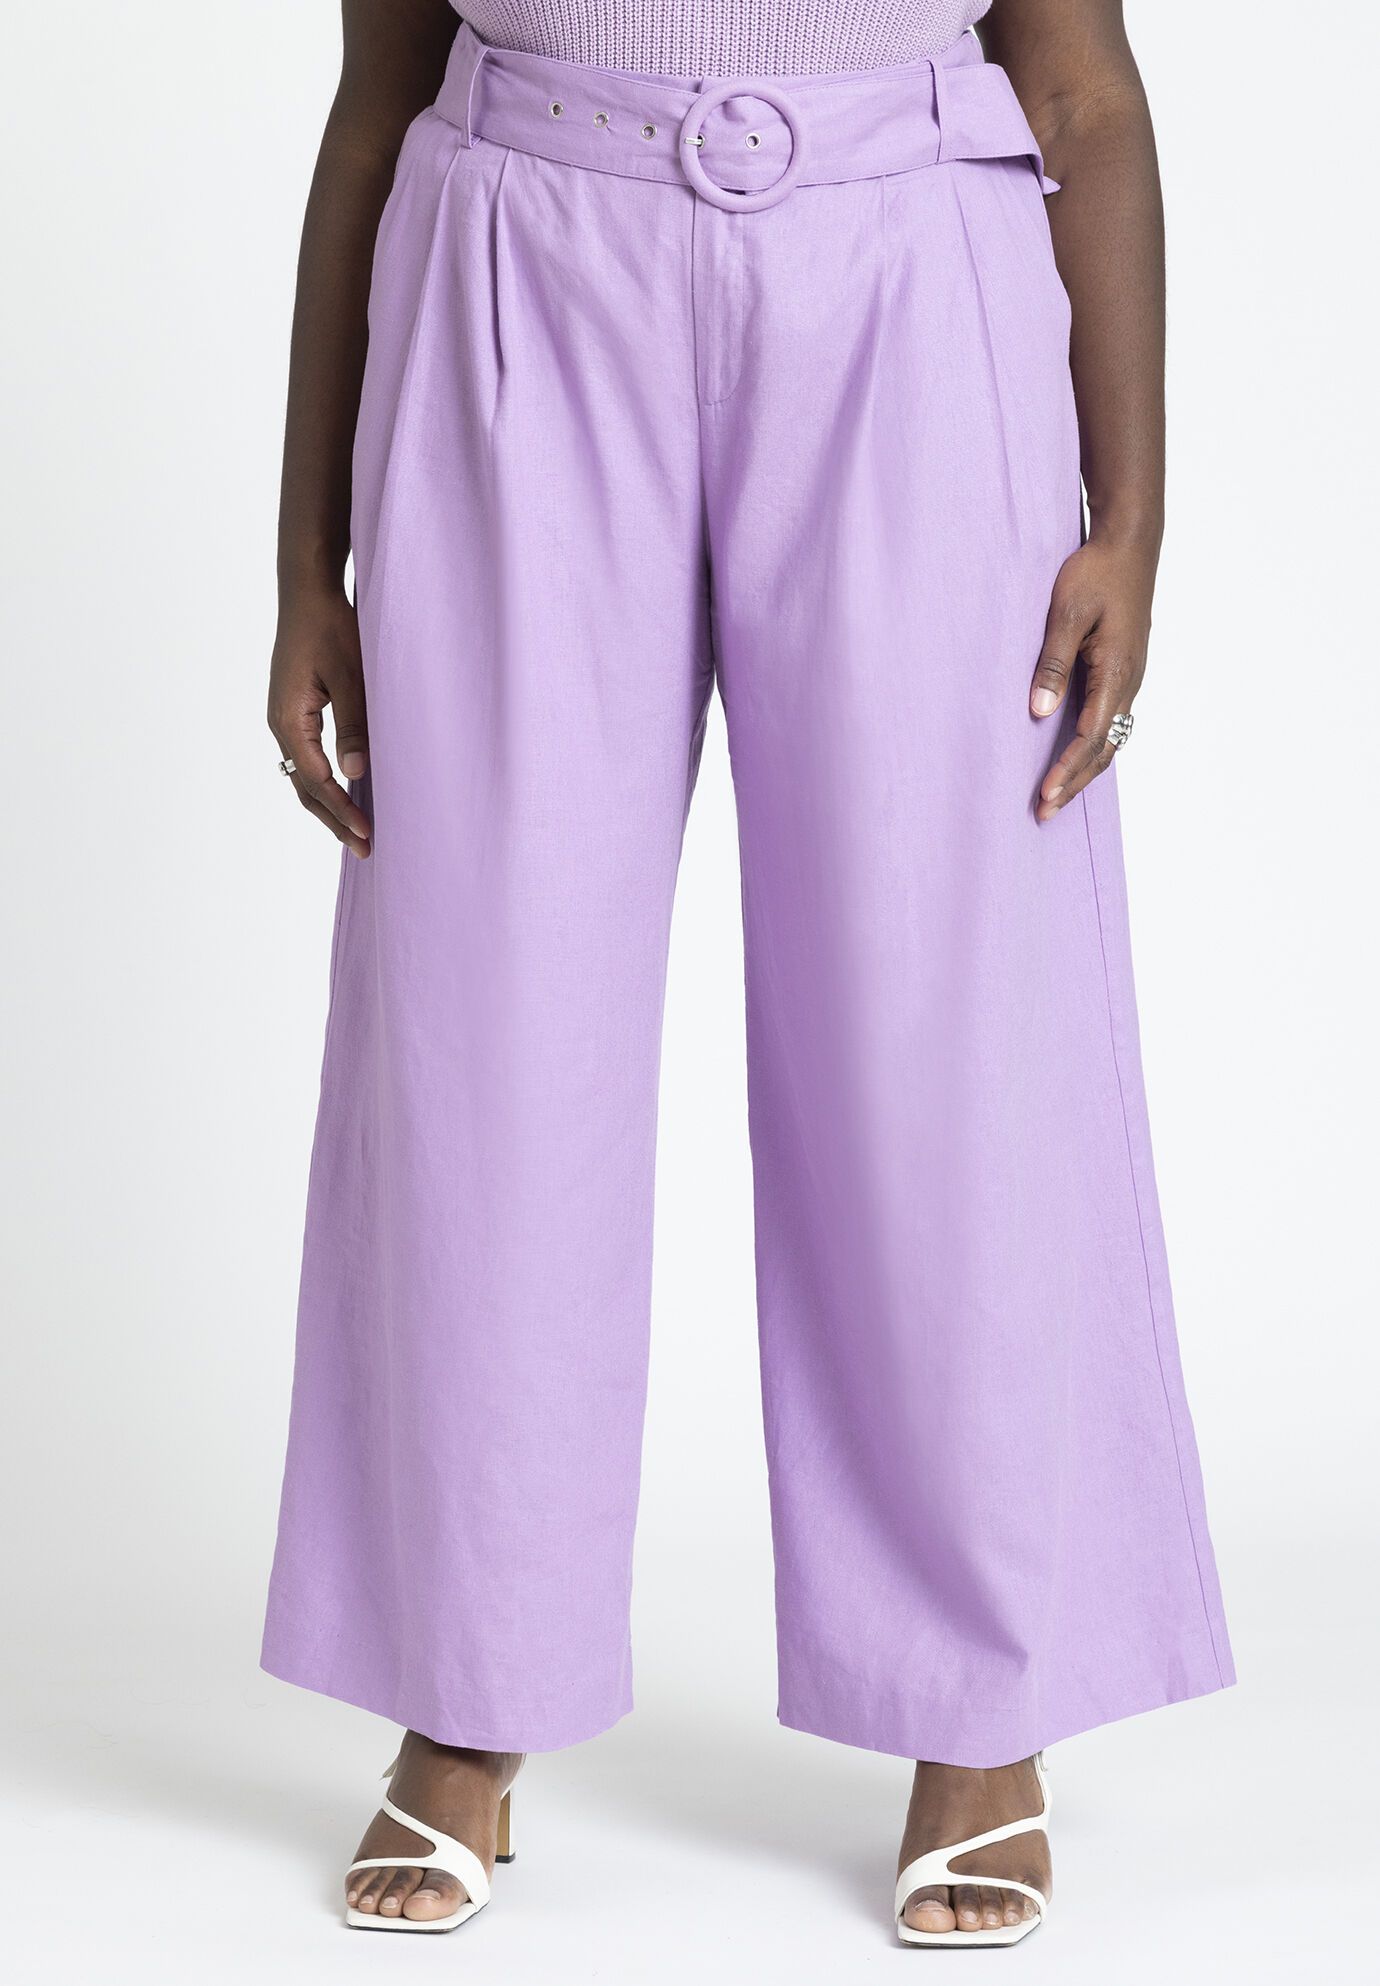 Pleat Detail Pant With Belt | Eloquii